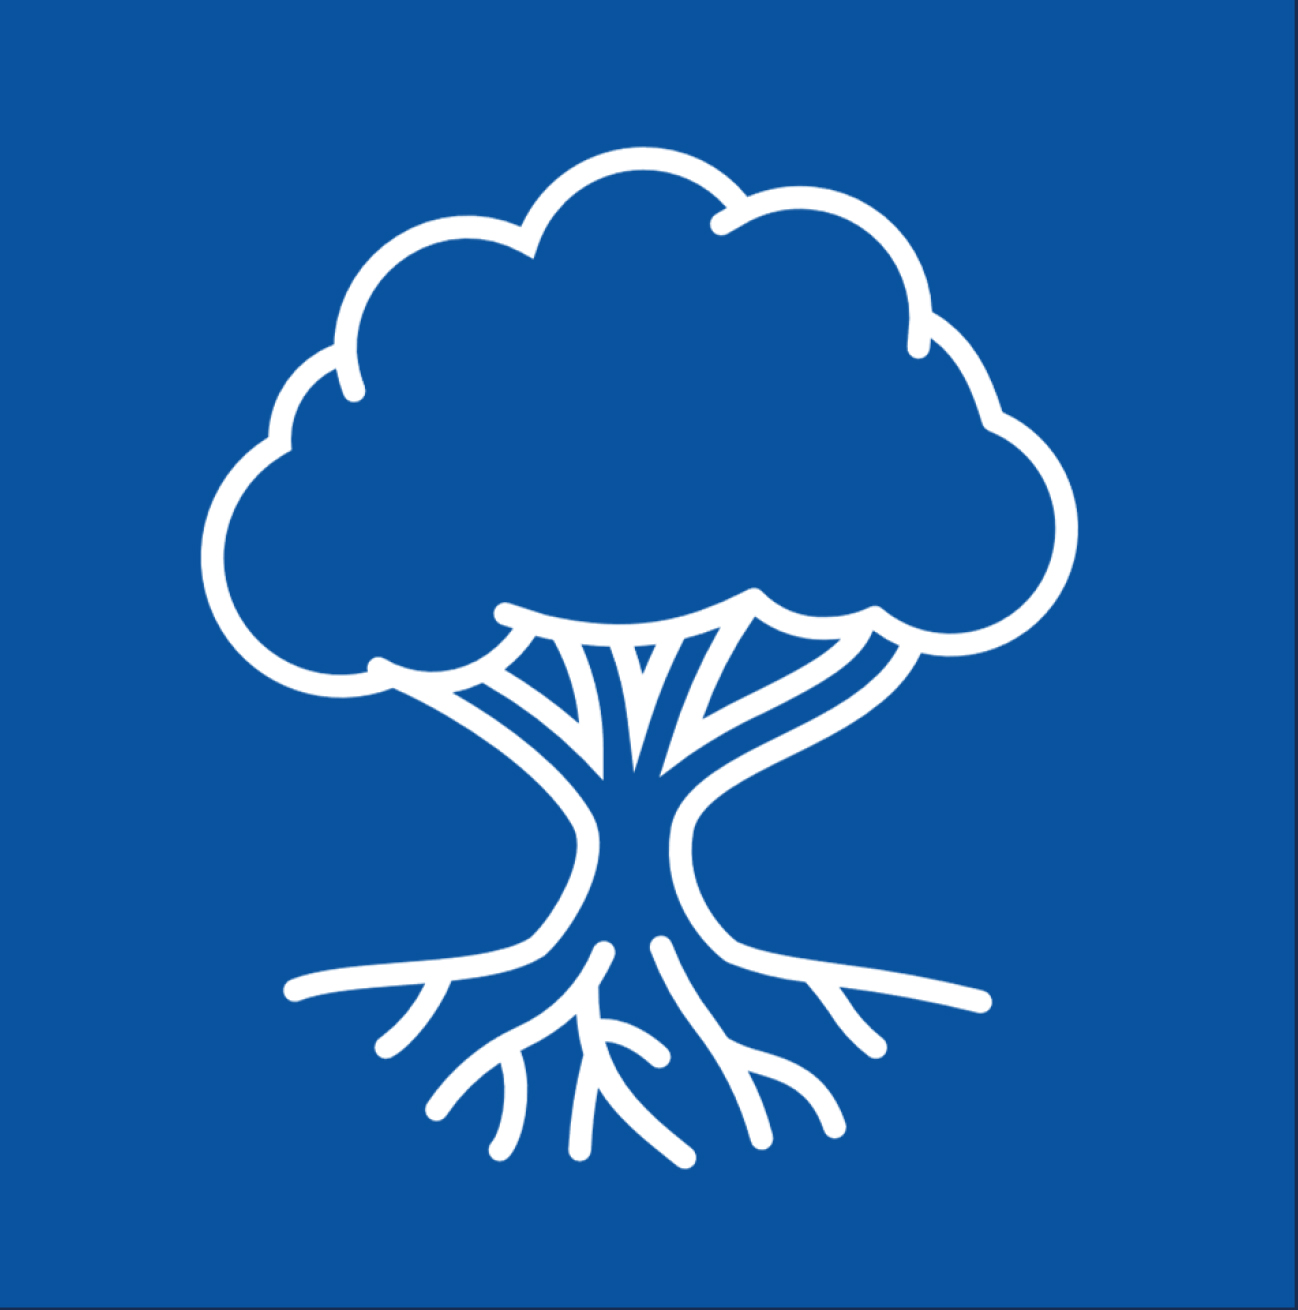 A white tree icon on a blue background.